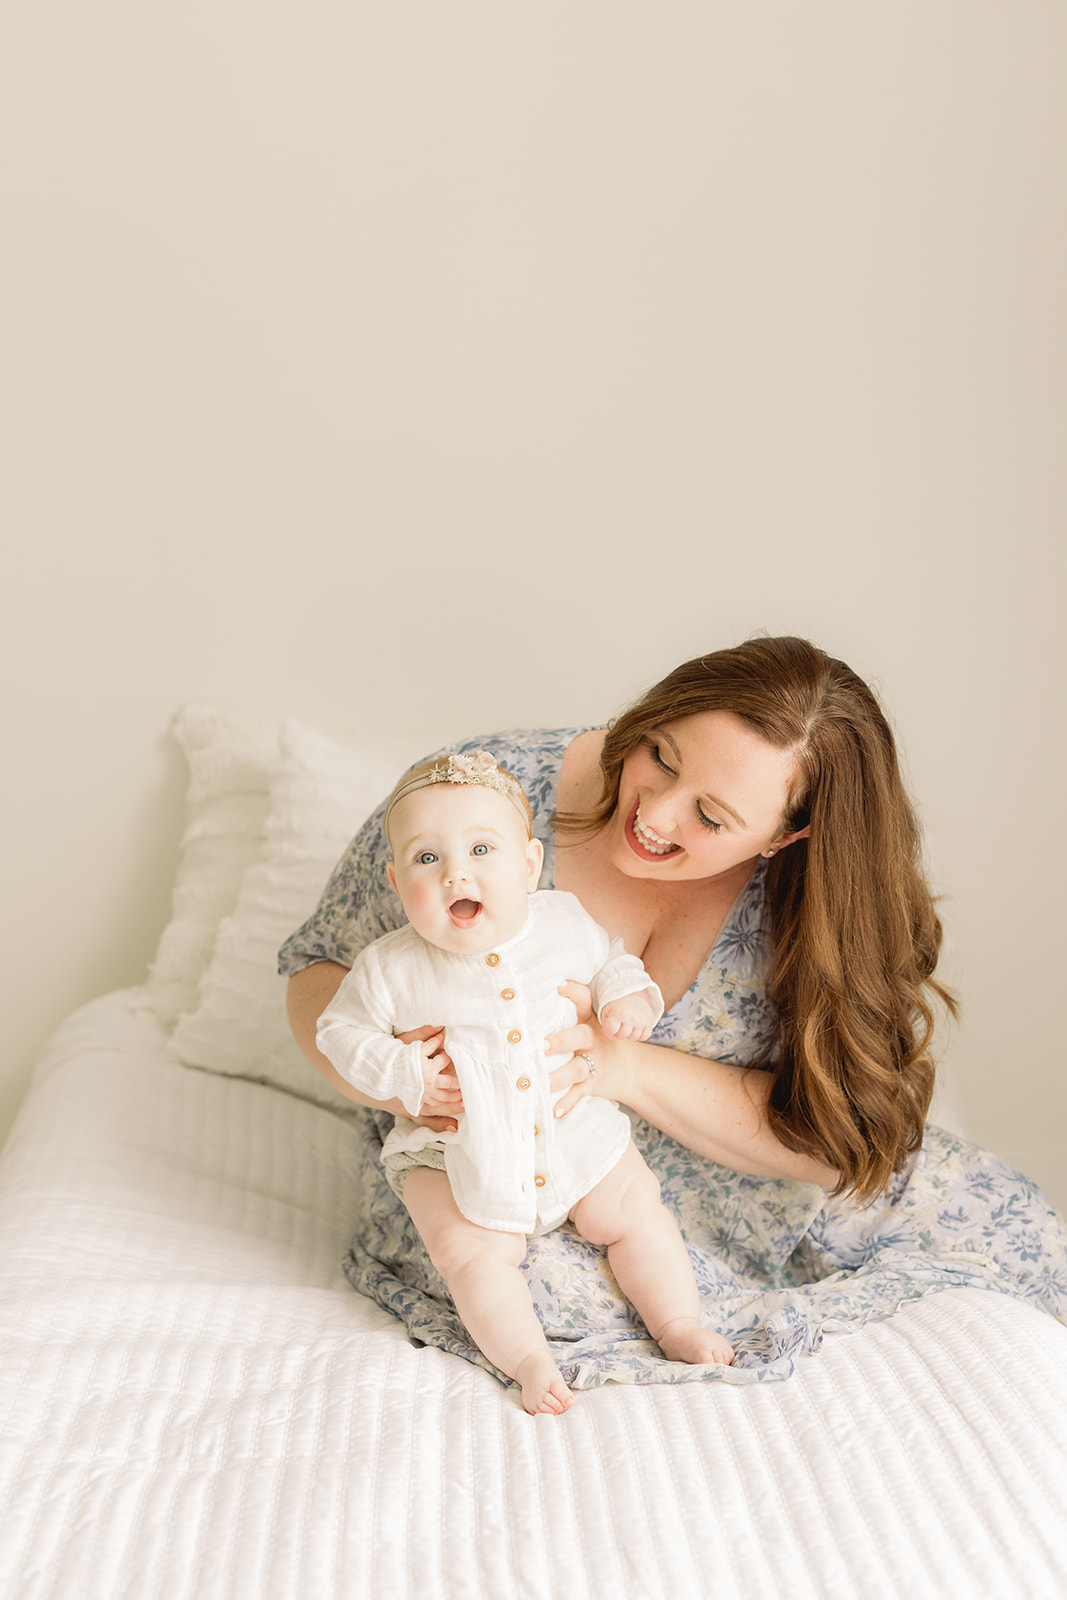 A mom plays with her infant daughter while sitting on a bed